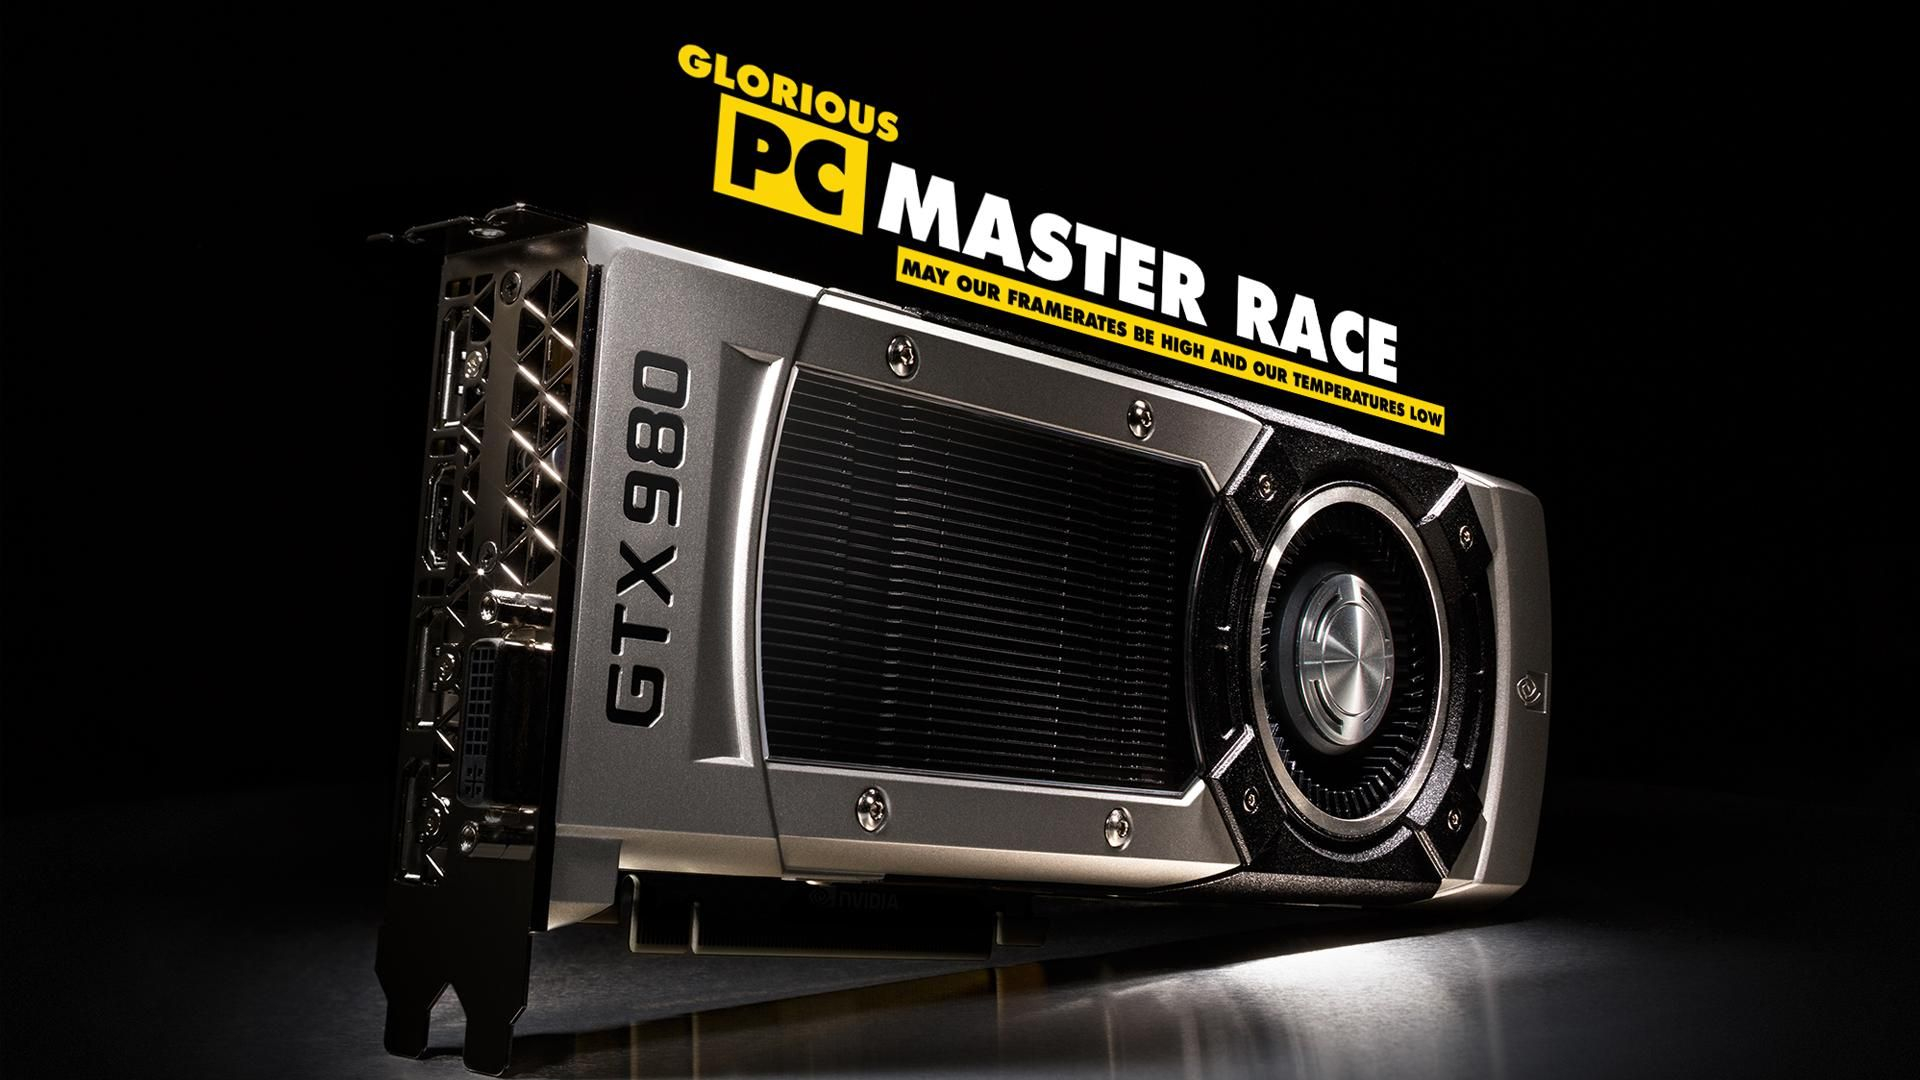 1920x1080 PC master race wallpapers | Nvidia, Graphic card, Gaming desktop